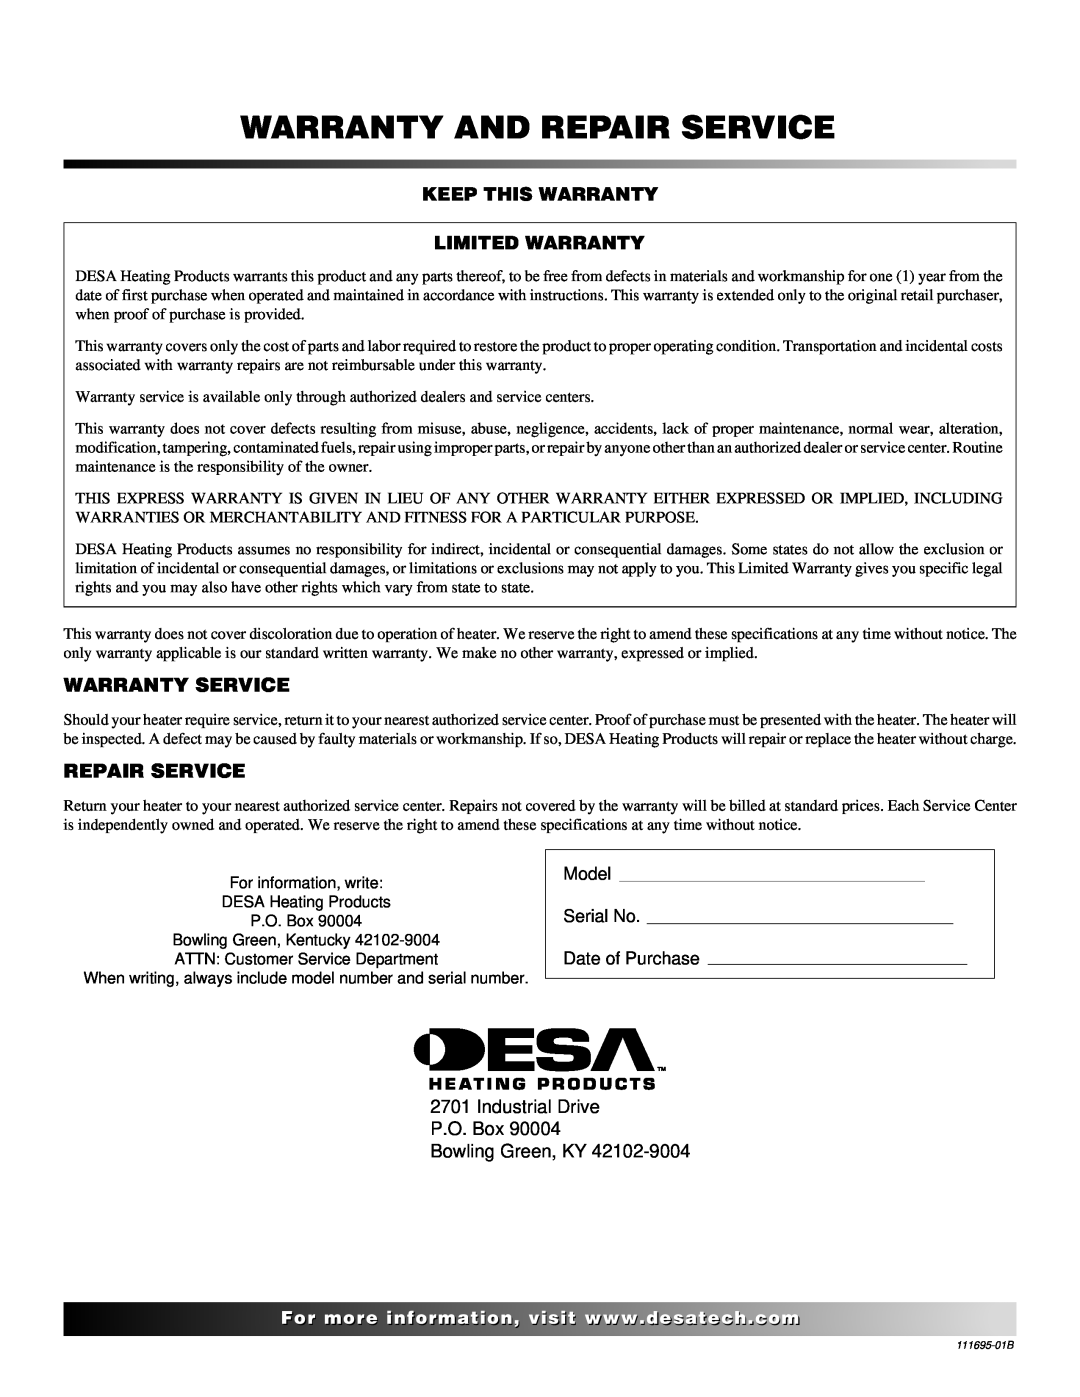 Desa PROPANE CONSTRUCTION CONVECTION HEATER owner manual Warranty And Repair Service, Warranty Service 